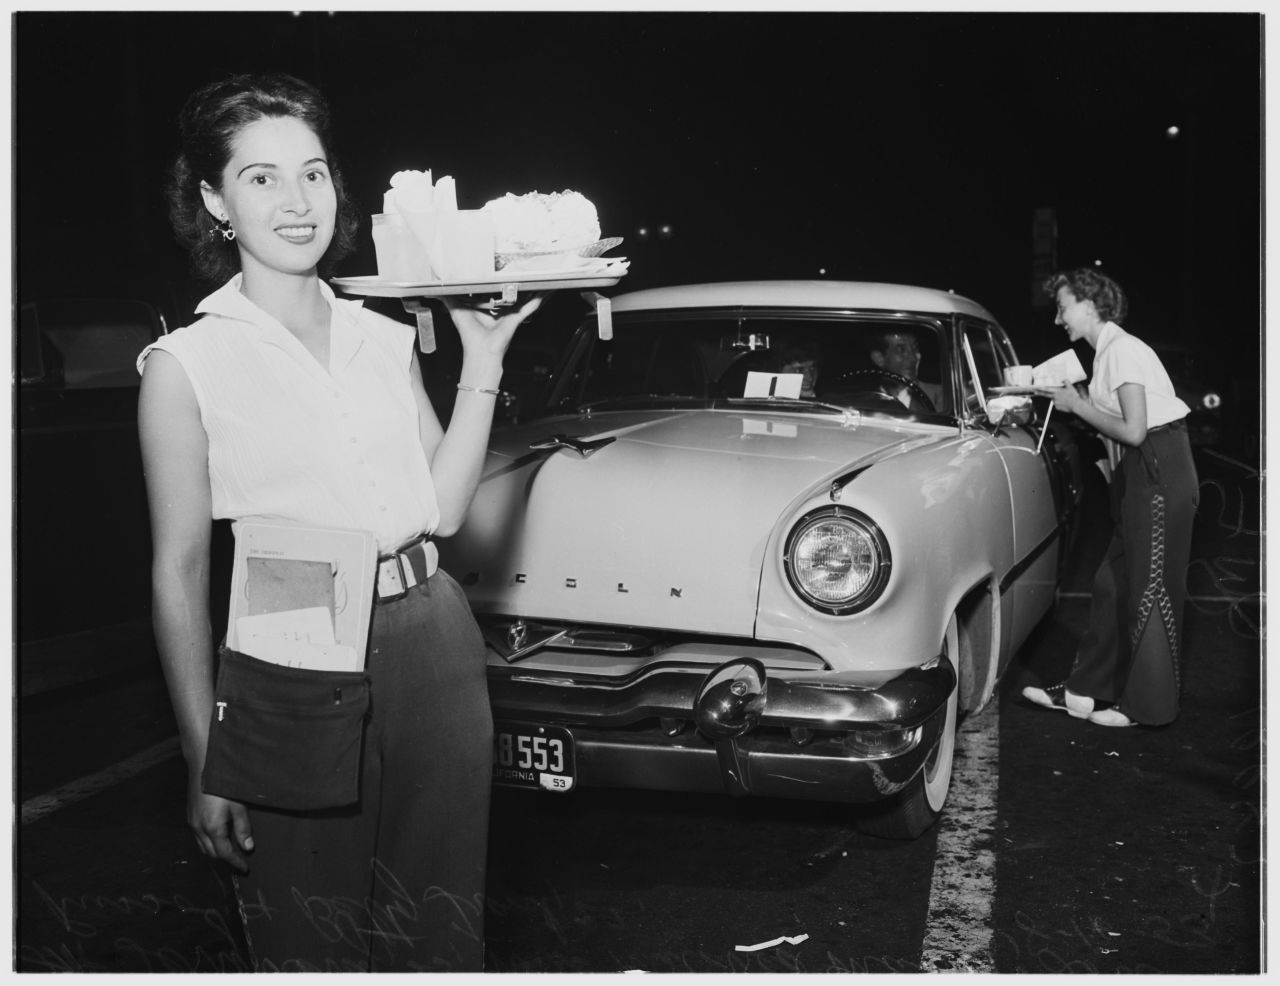 The popularity of carhop dining evolved in America in tandem with the popularity of the automobile itself, predating the fast-food drive-through and reaching a peak in the years following World War II. 